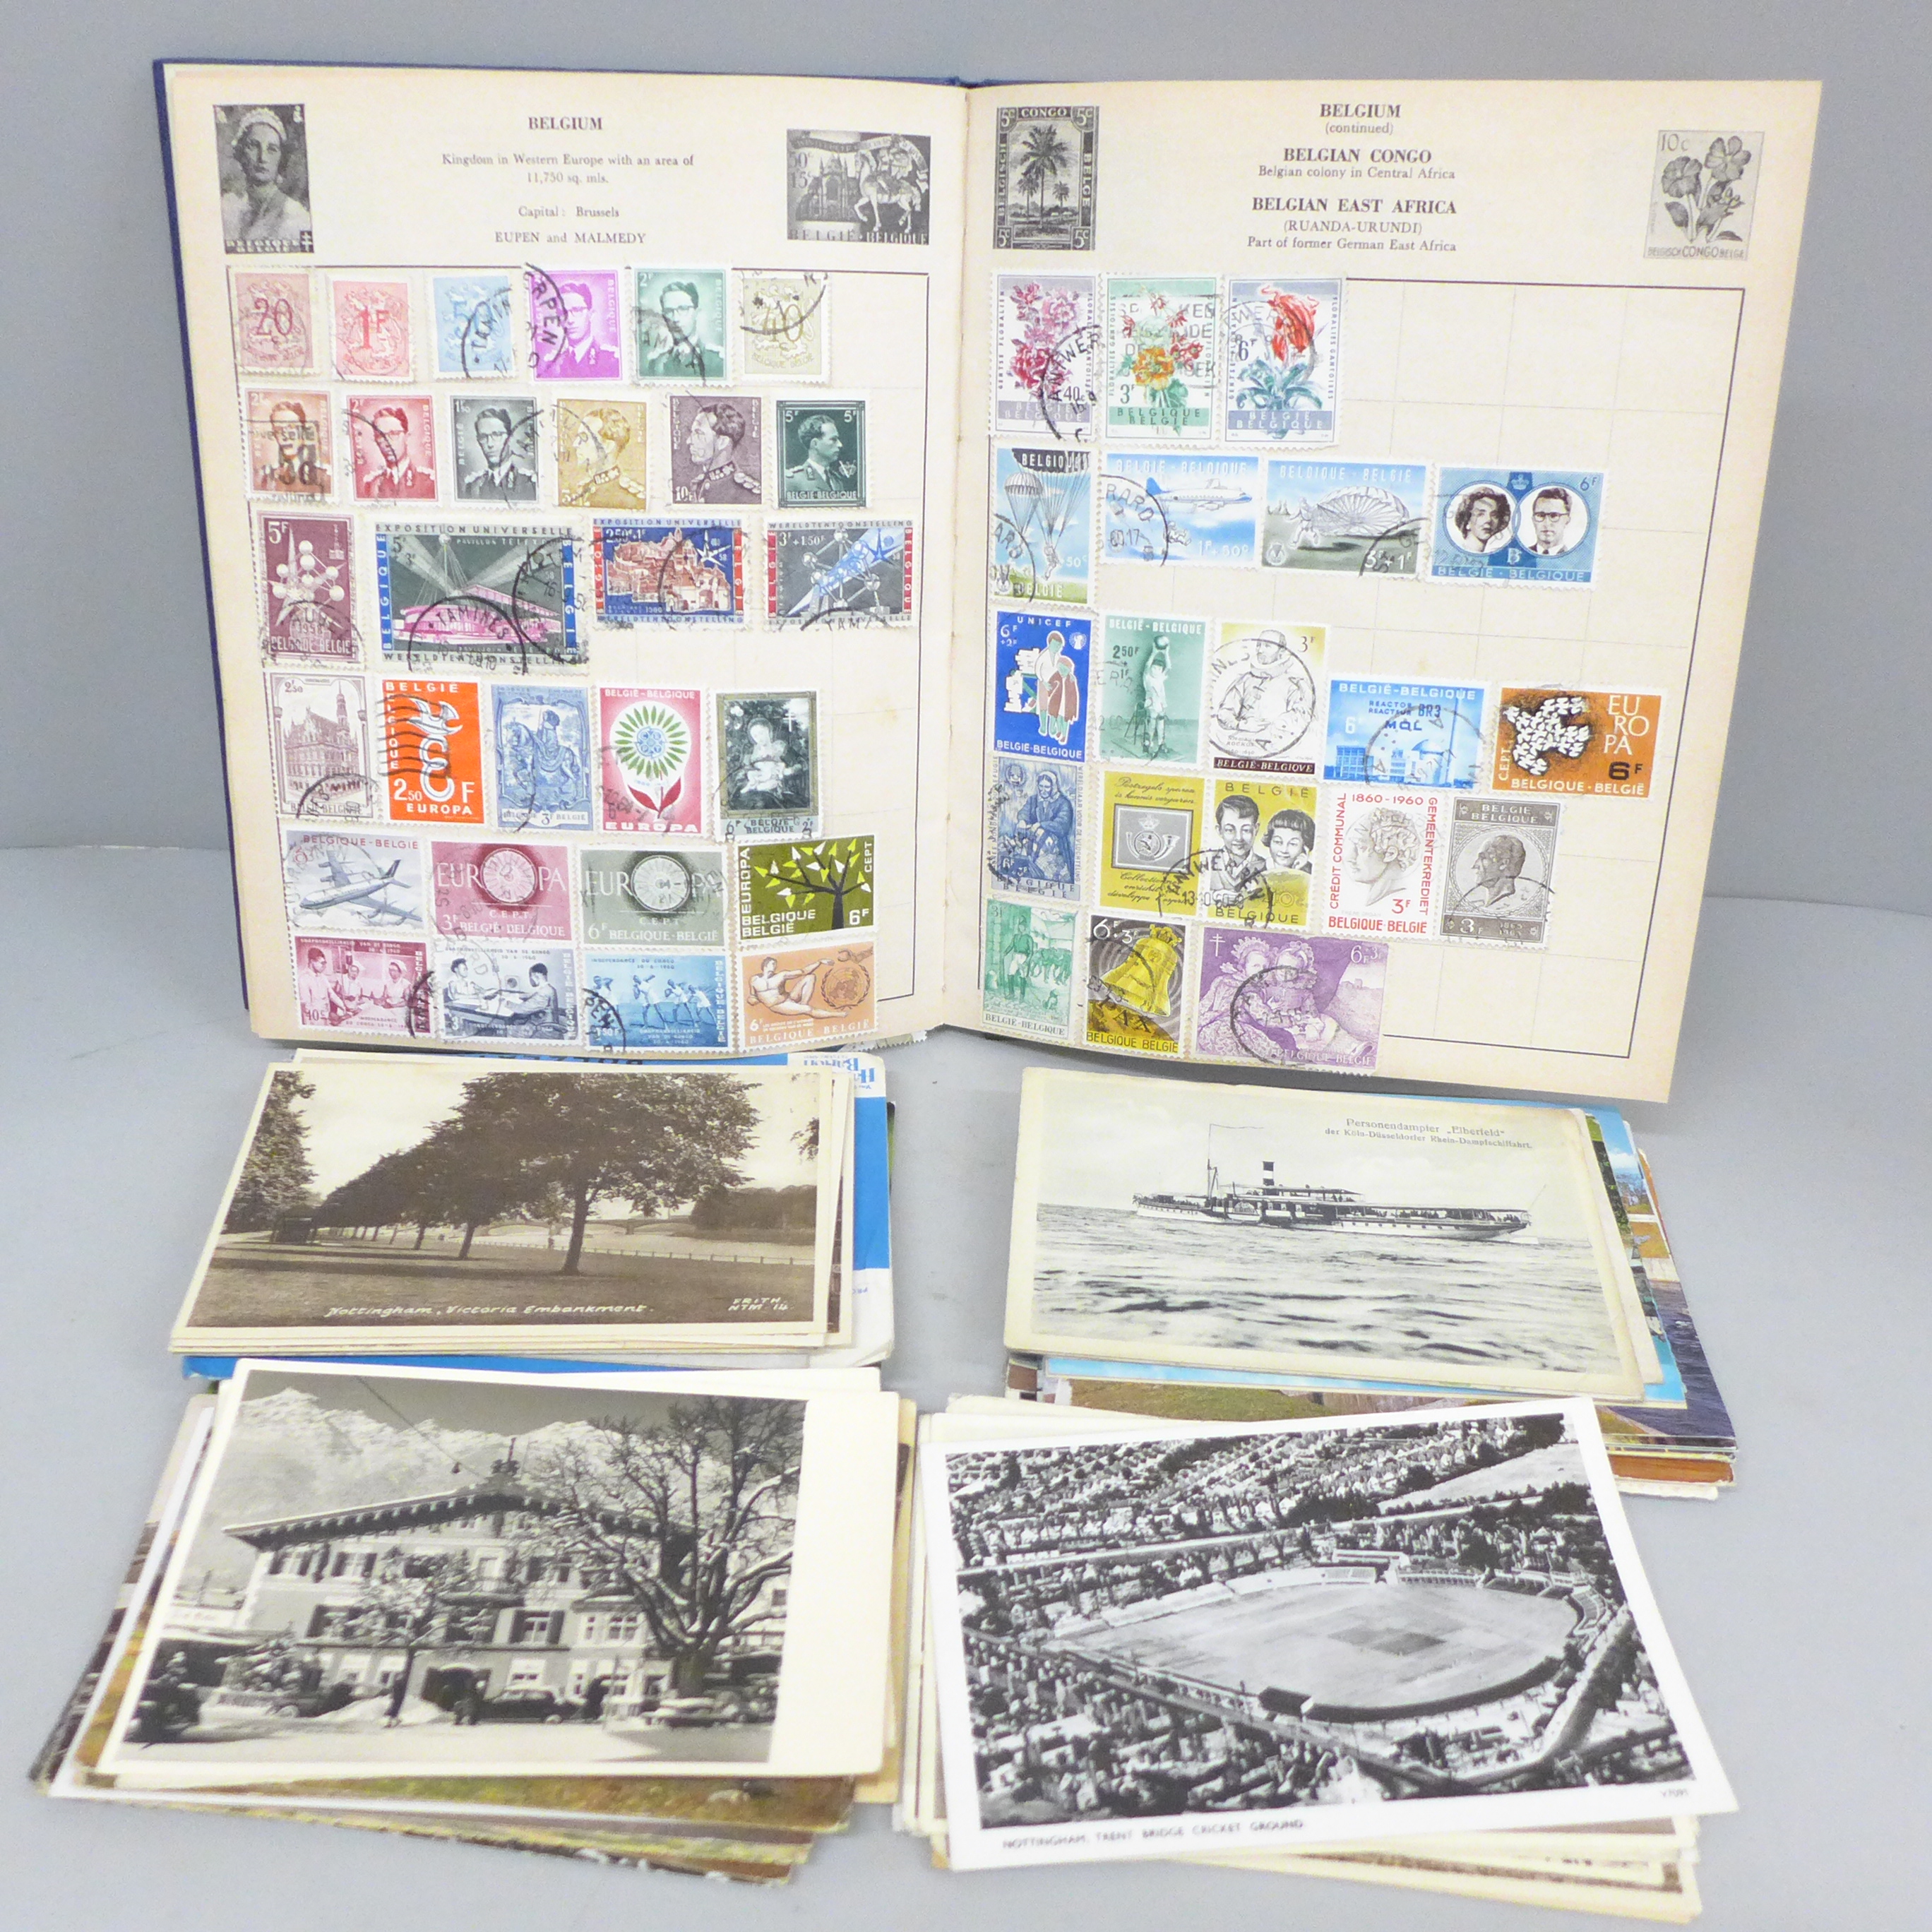 A stamp album and a collection of postcards